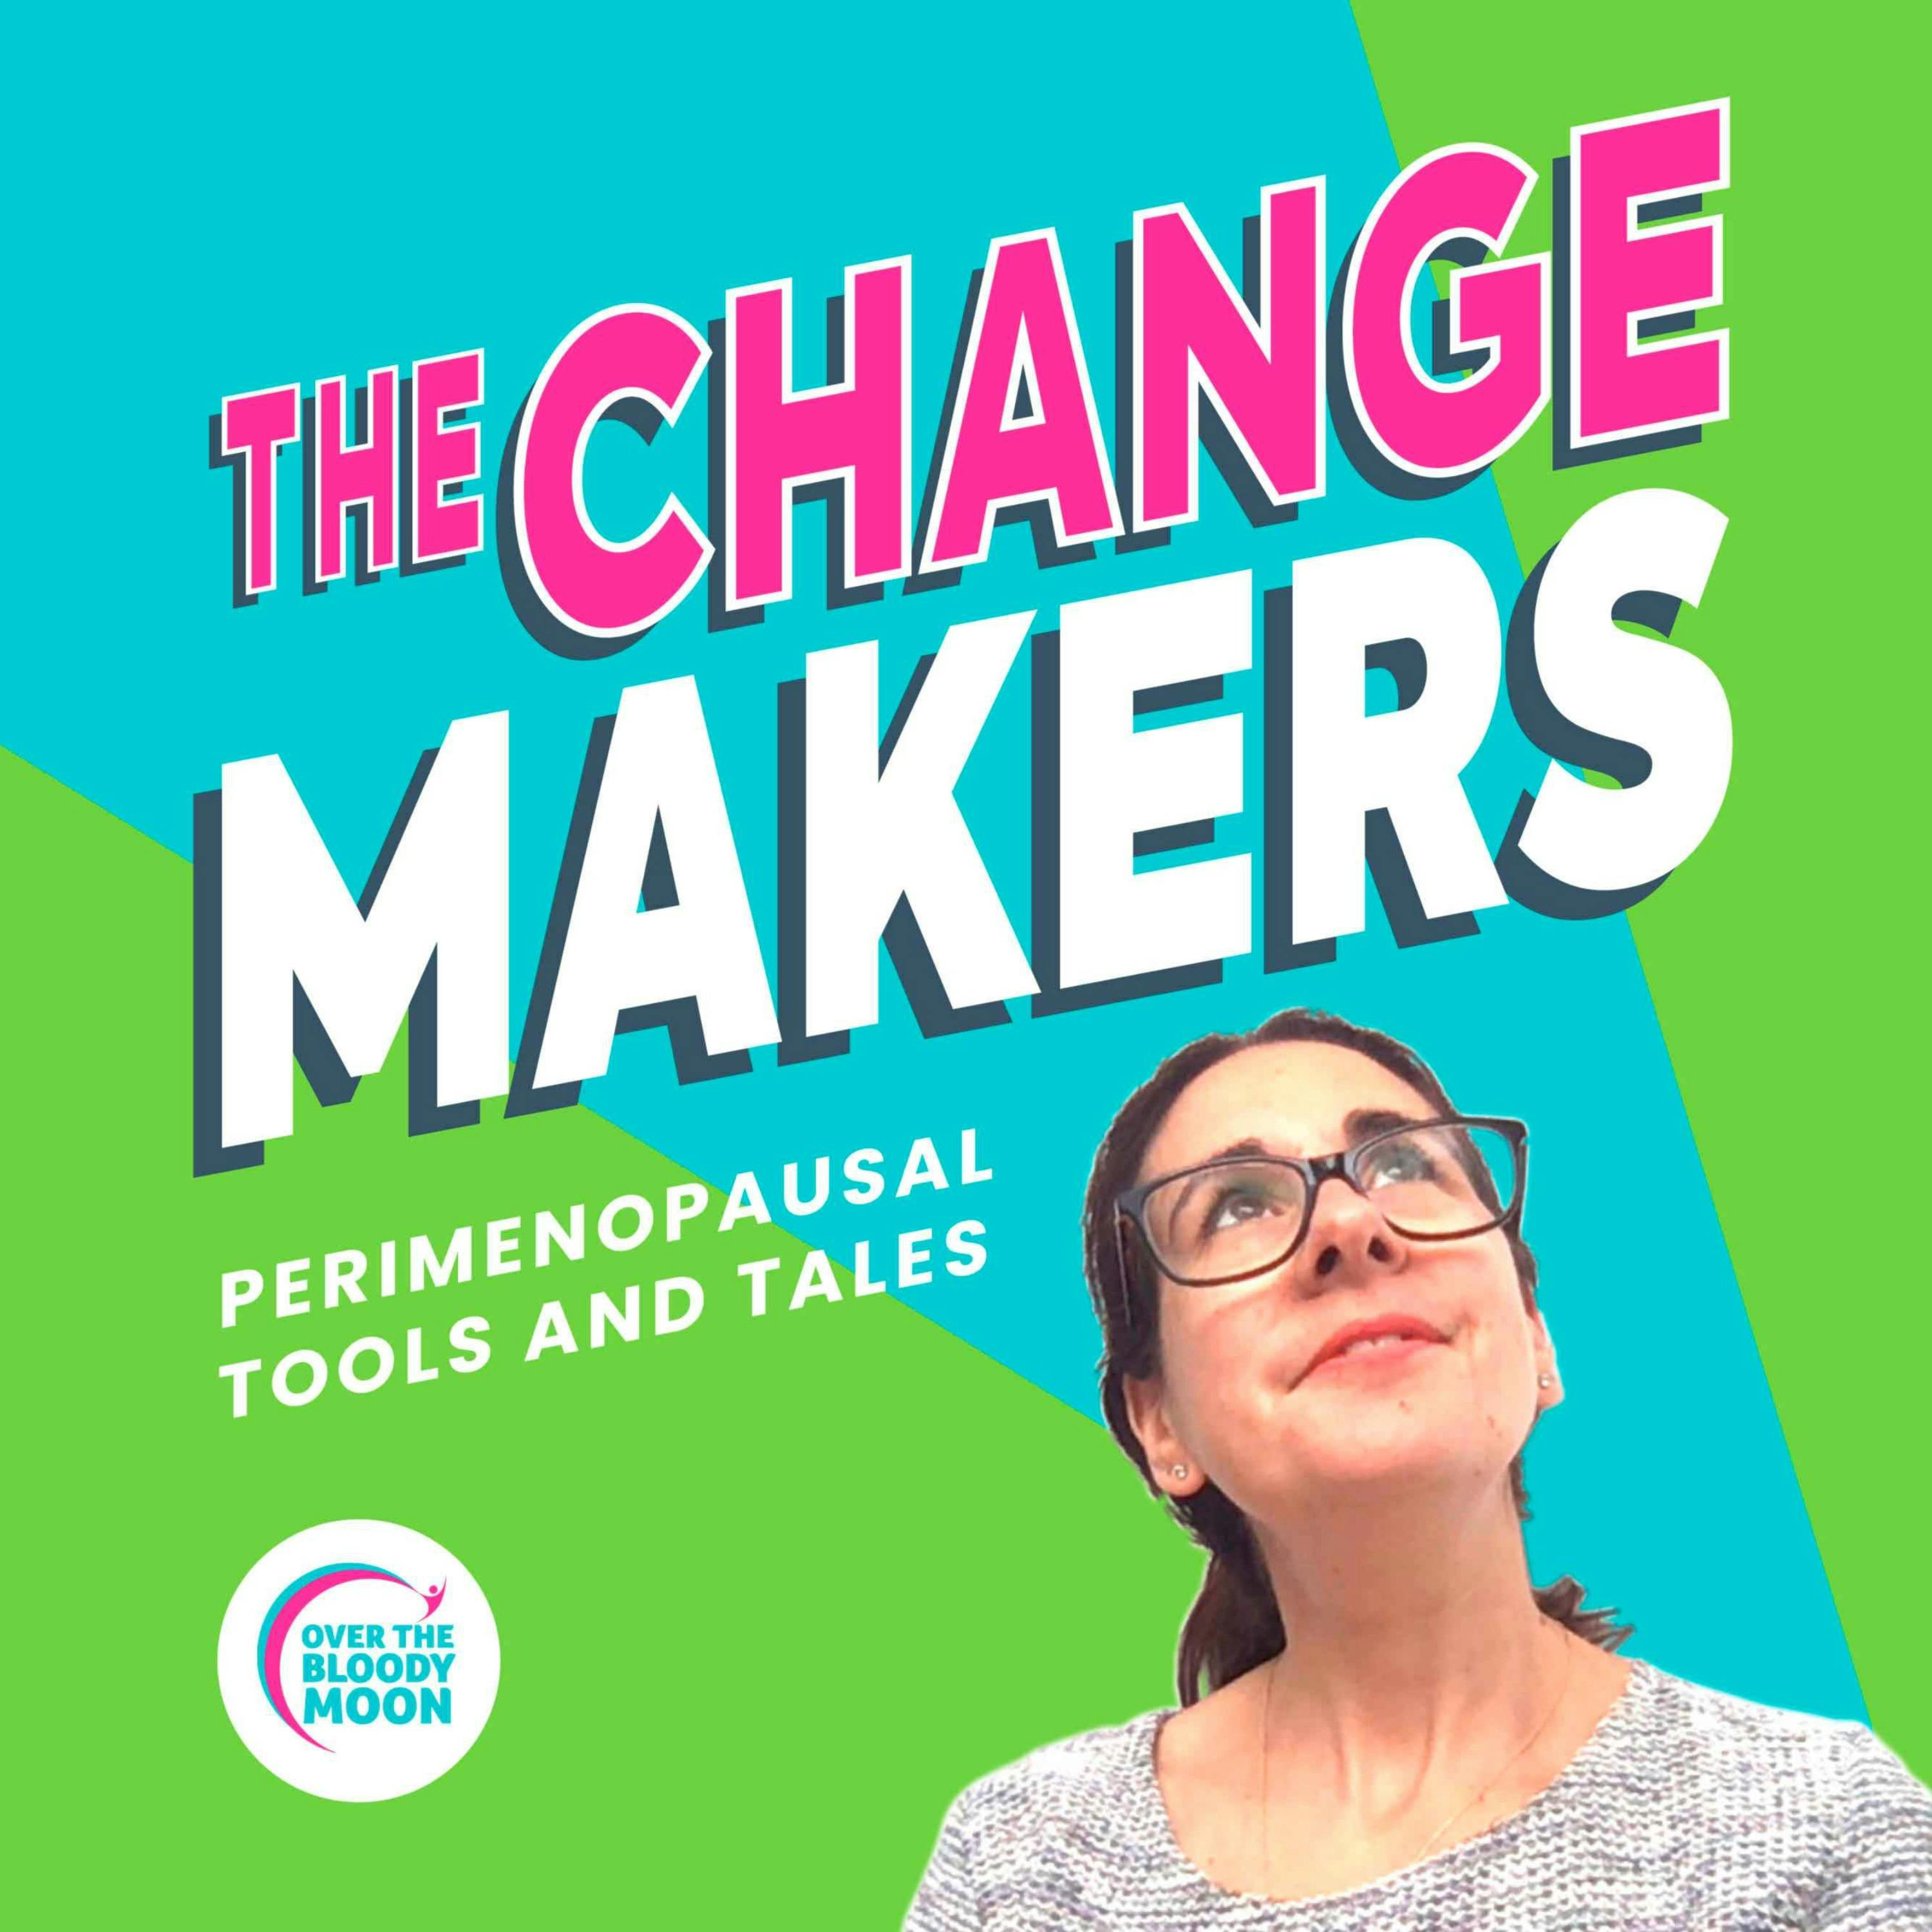 The Change Makers by Over The Bloody Moon on Stitcher